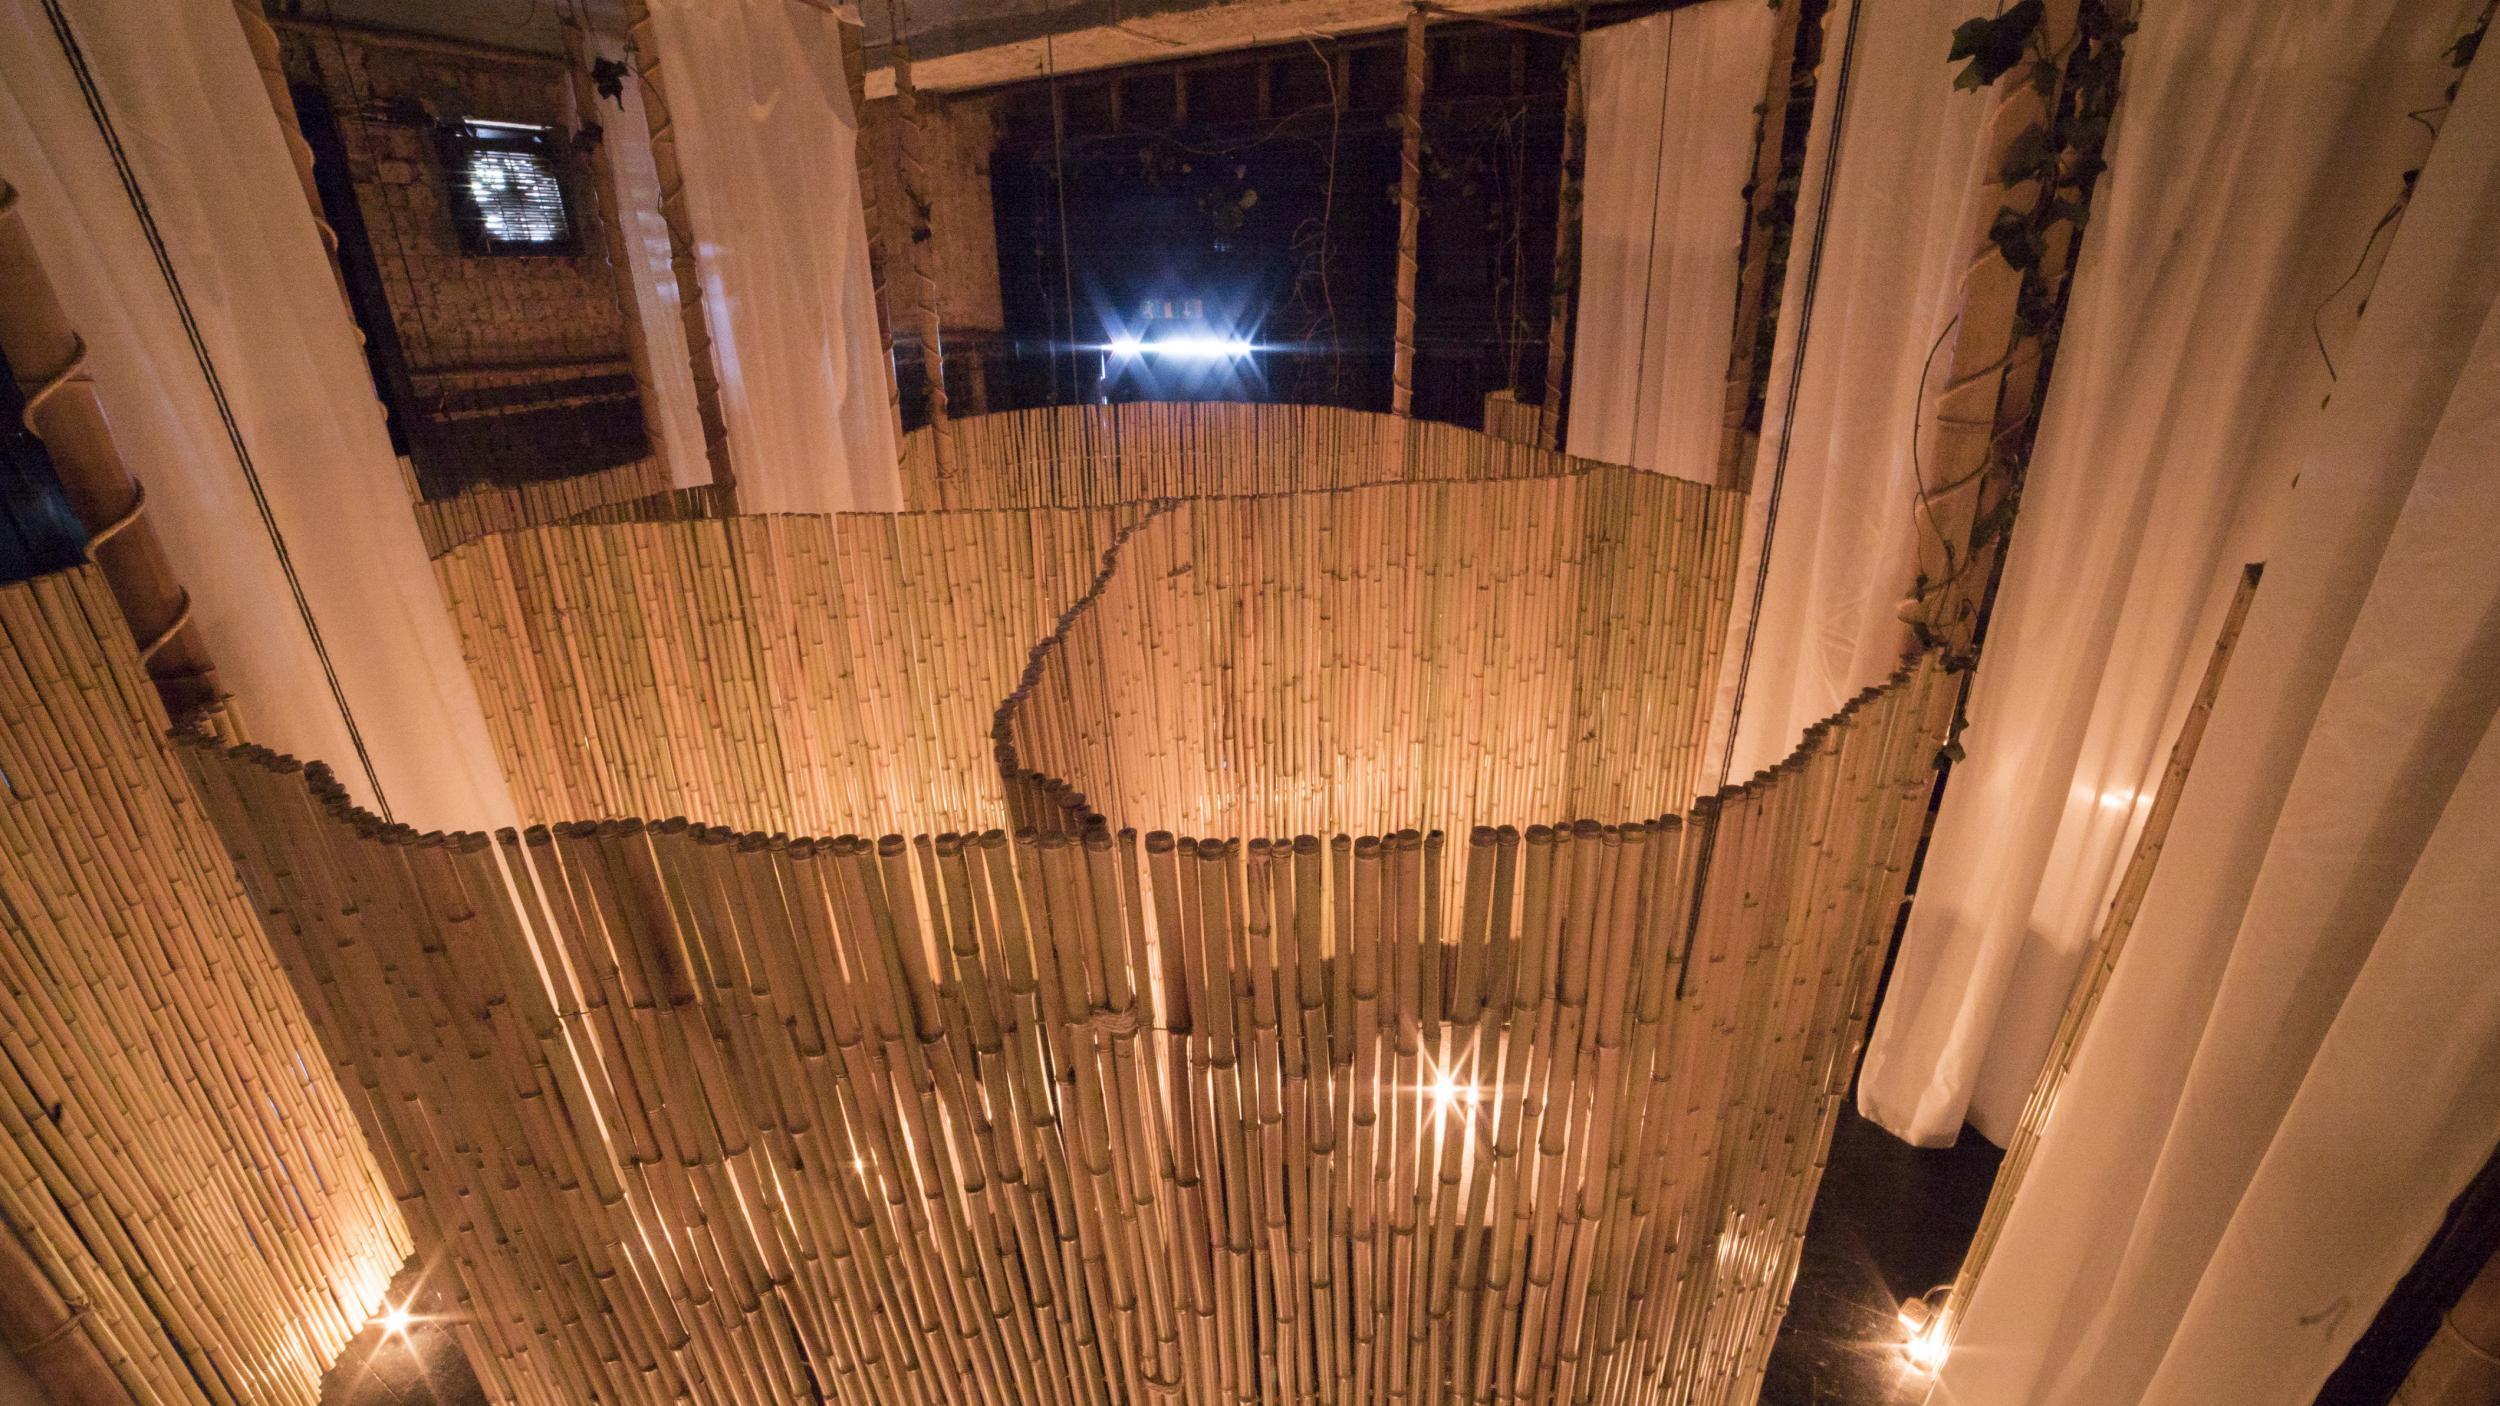 Bamboo booths separate the naked diners